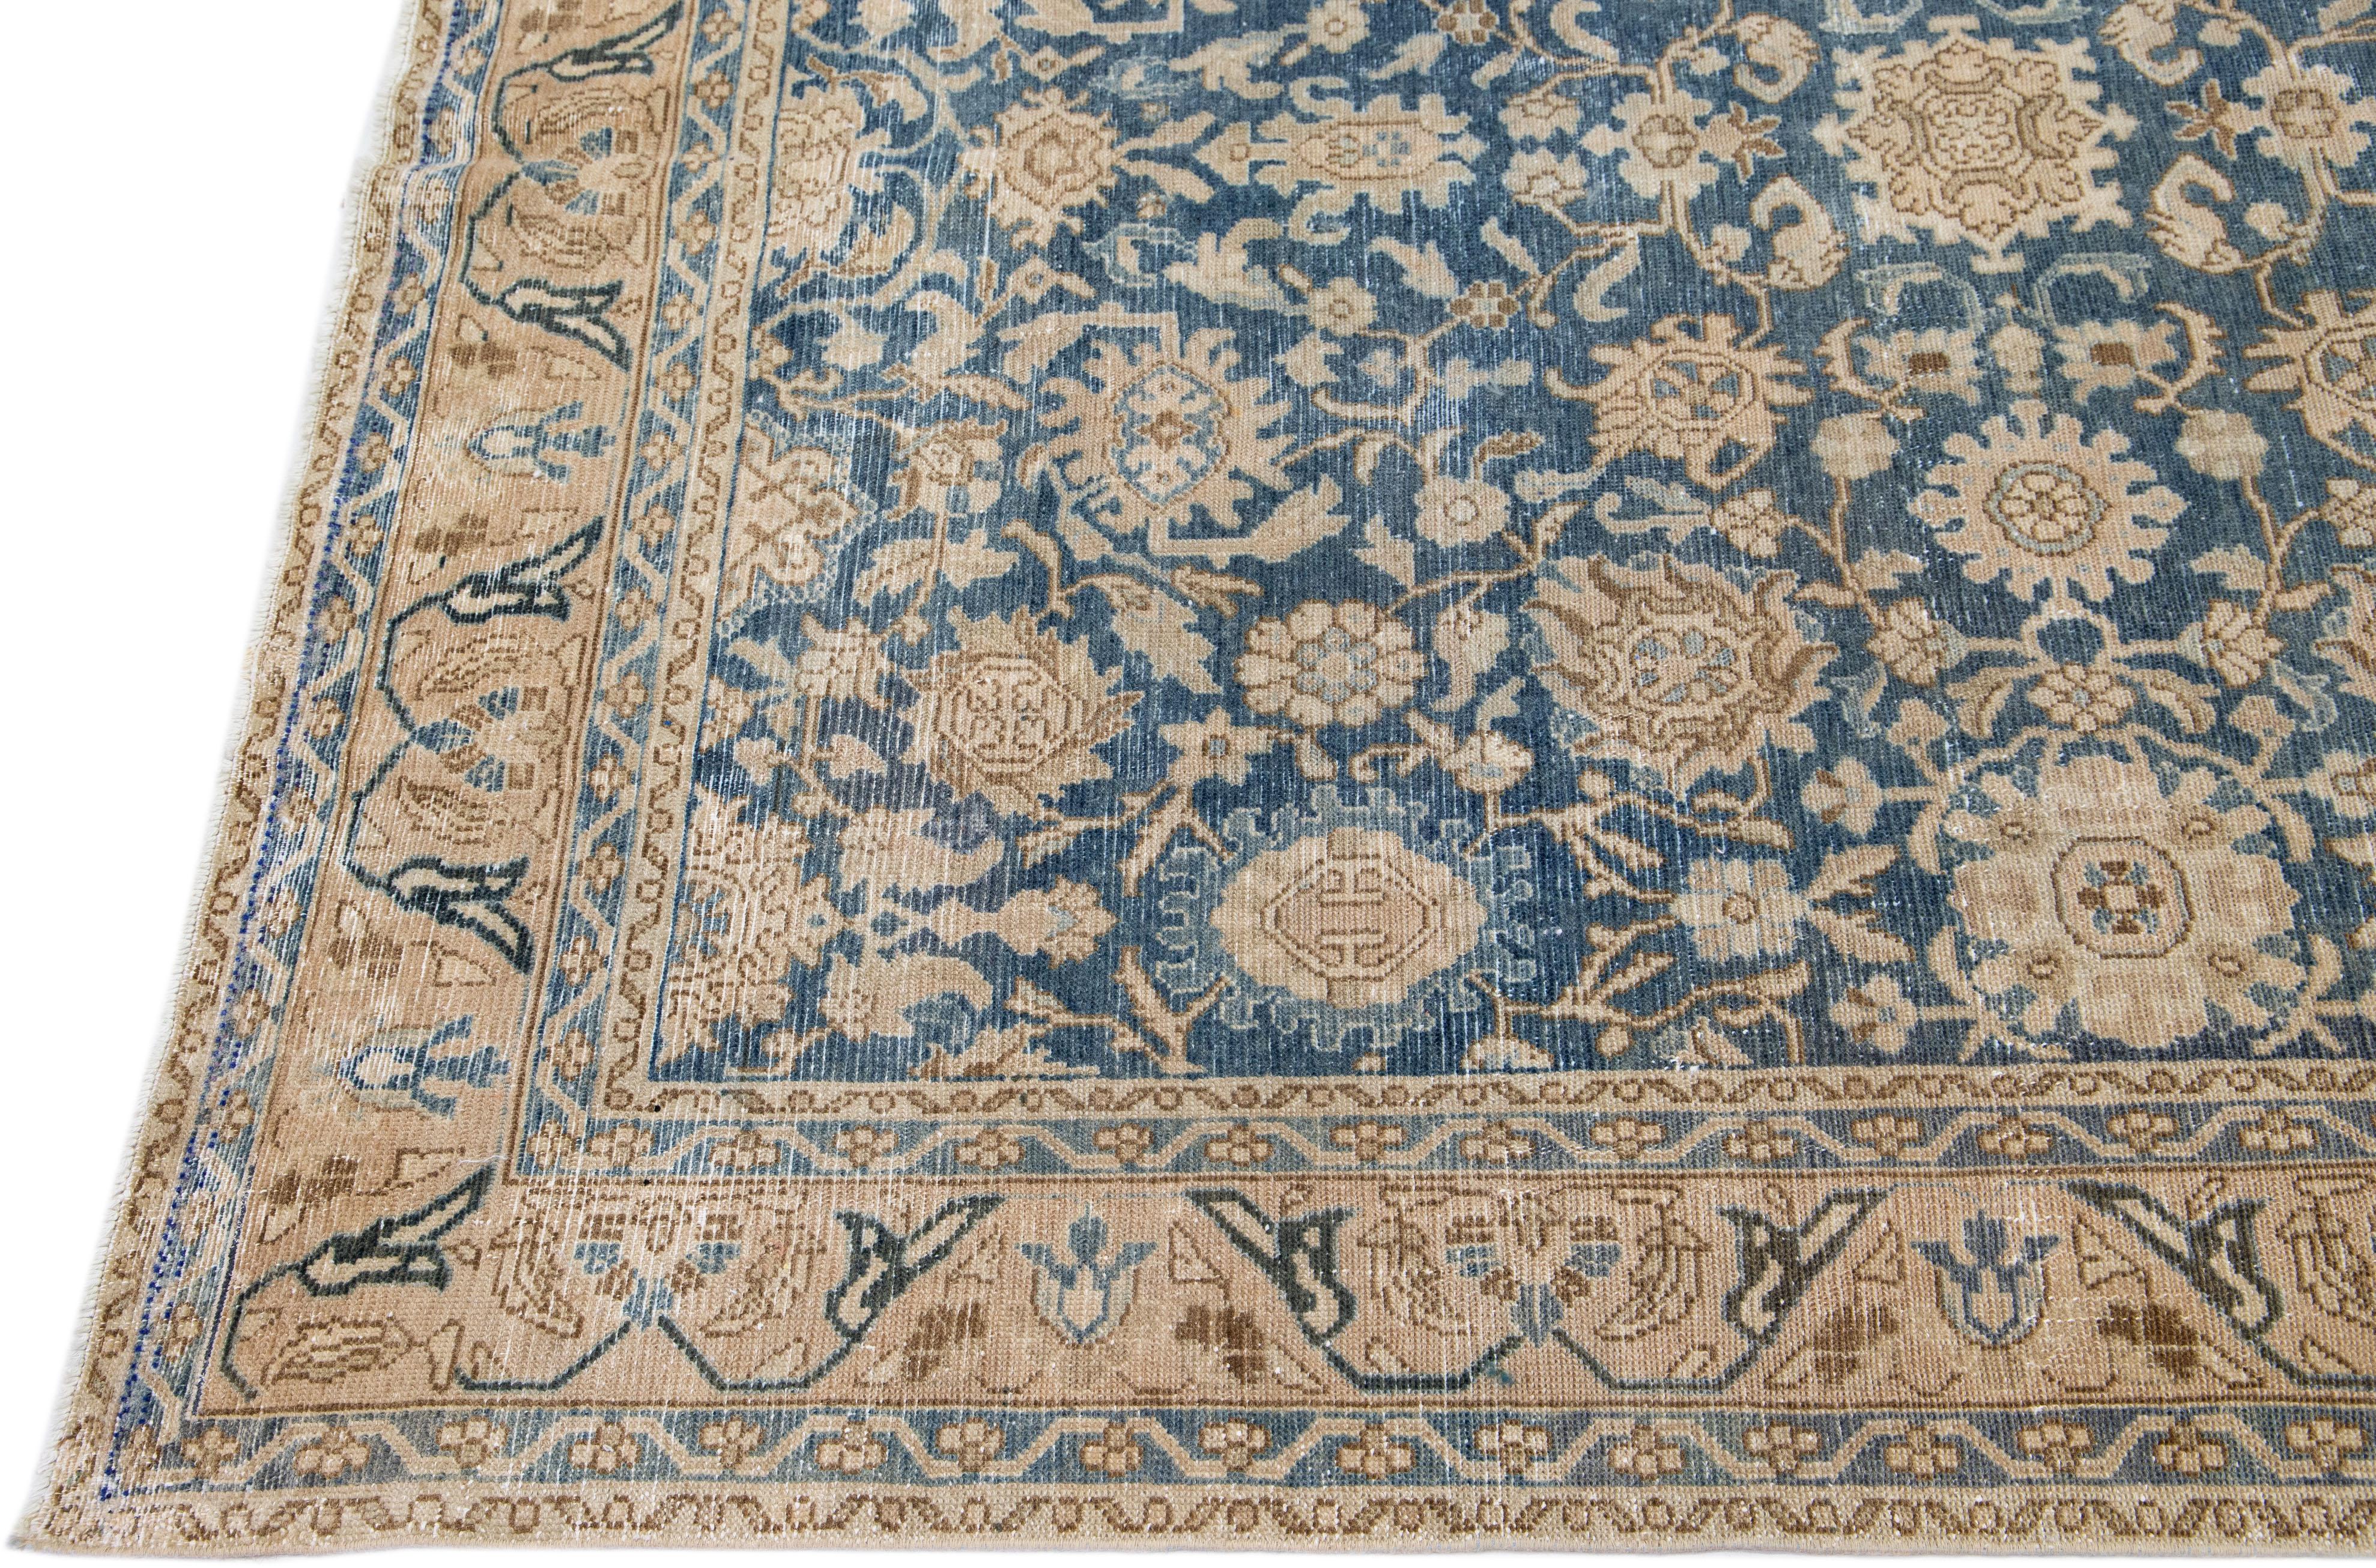 Blue Antique Persian Malayer Handmade Wool Rug with Allover Floral Design In Good Condition For Sale In Norwalk, CT